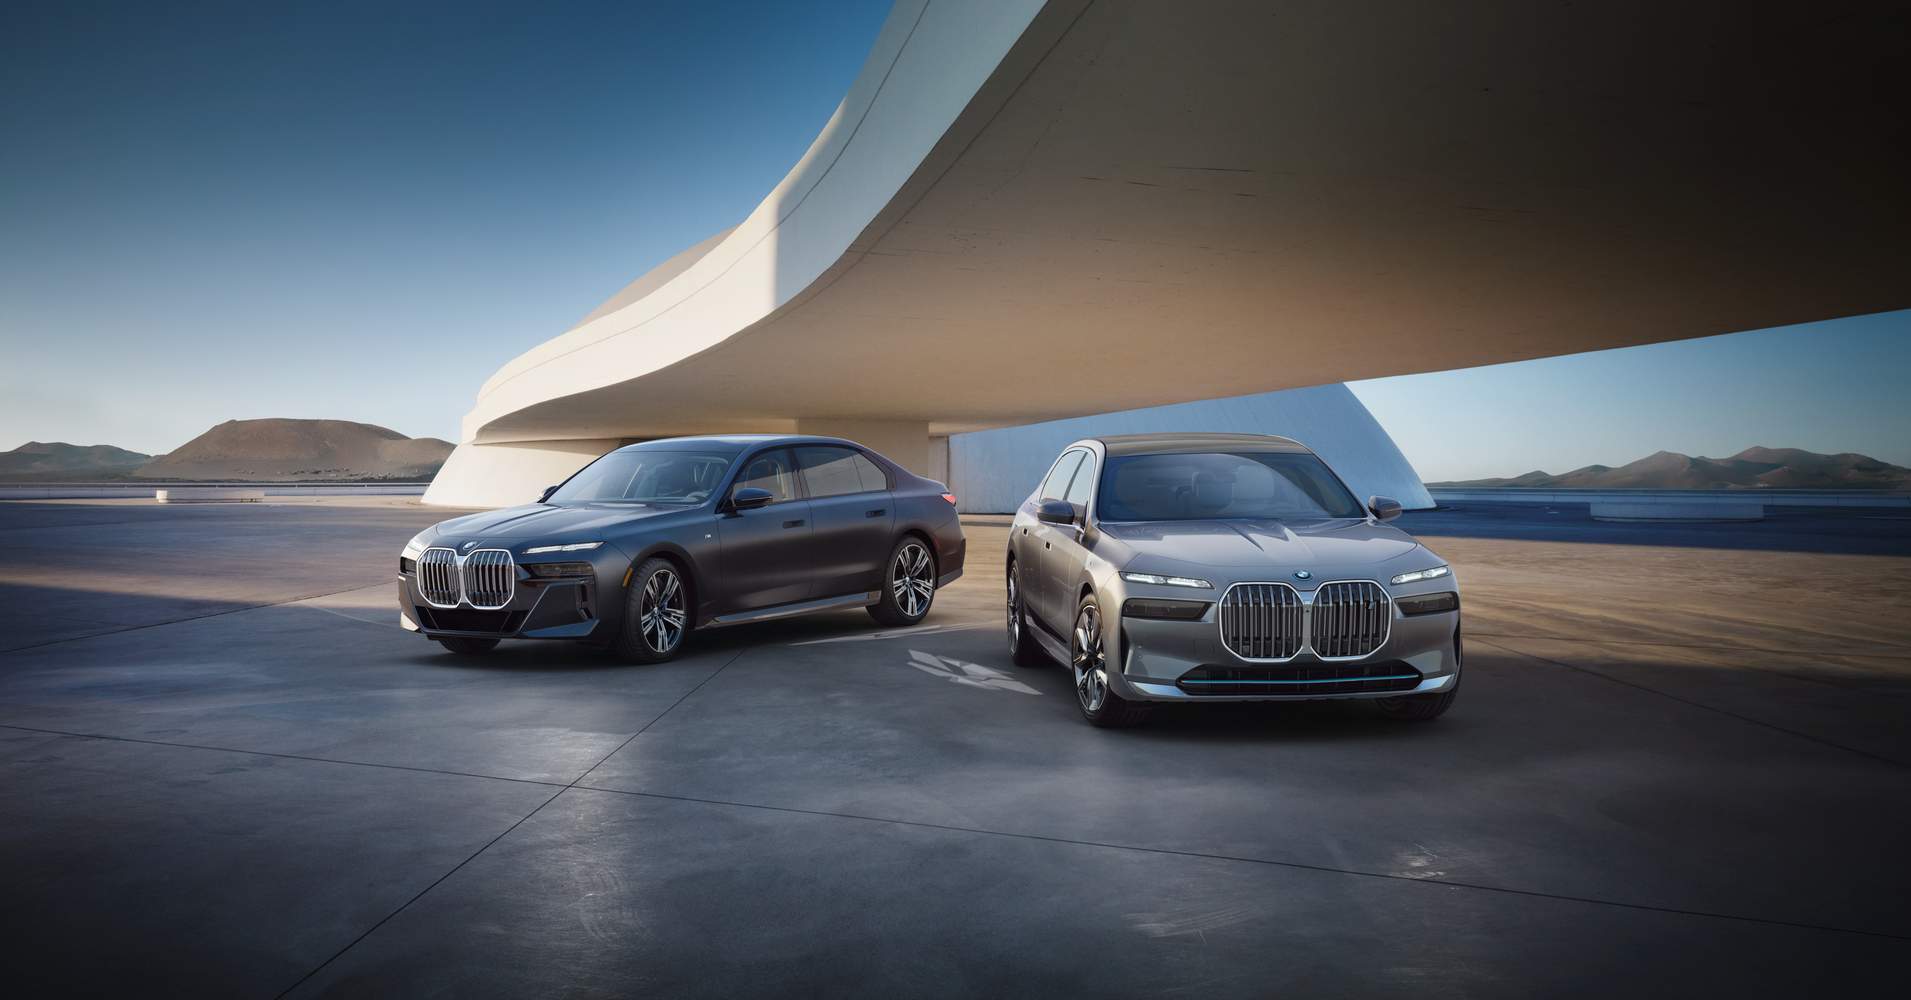 The 2023 BMW 7 Series and the 2023 BMW i7 parked under bridge